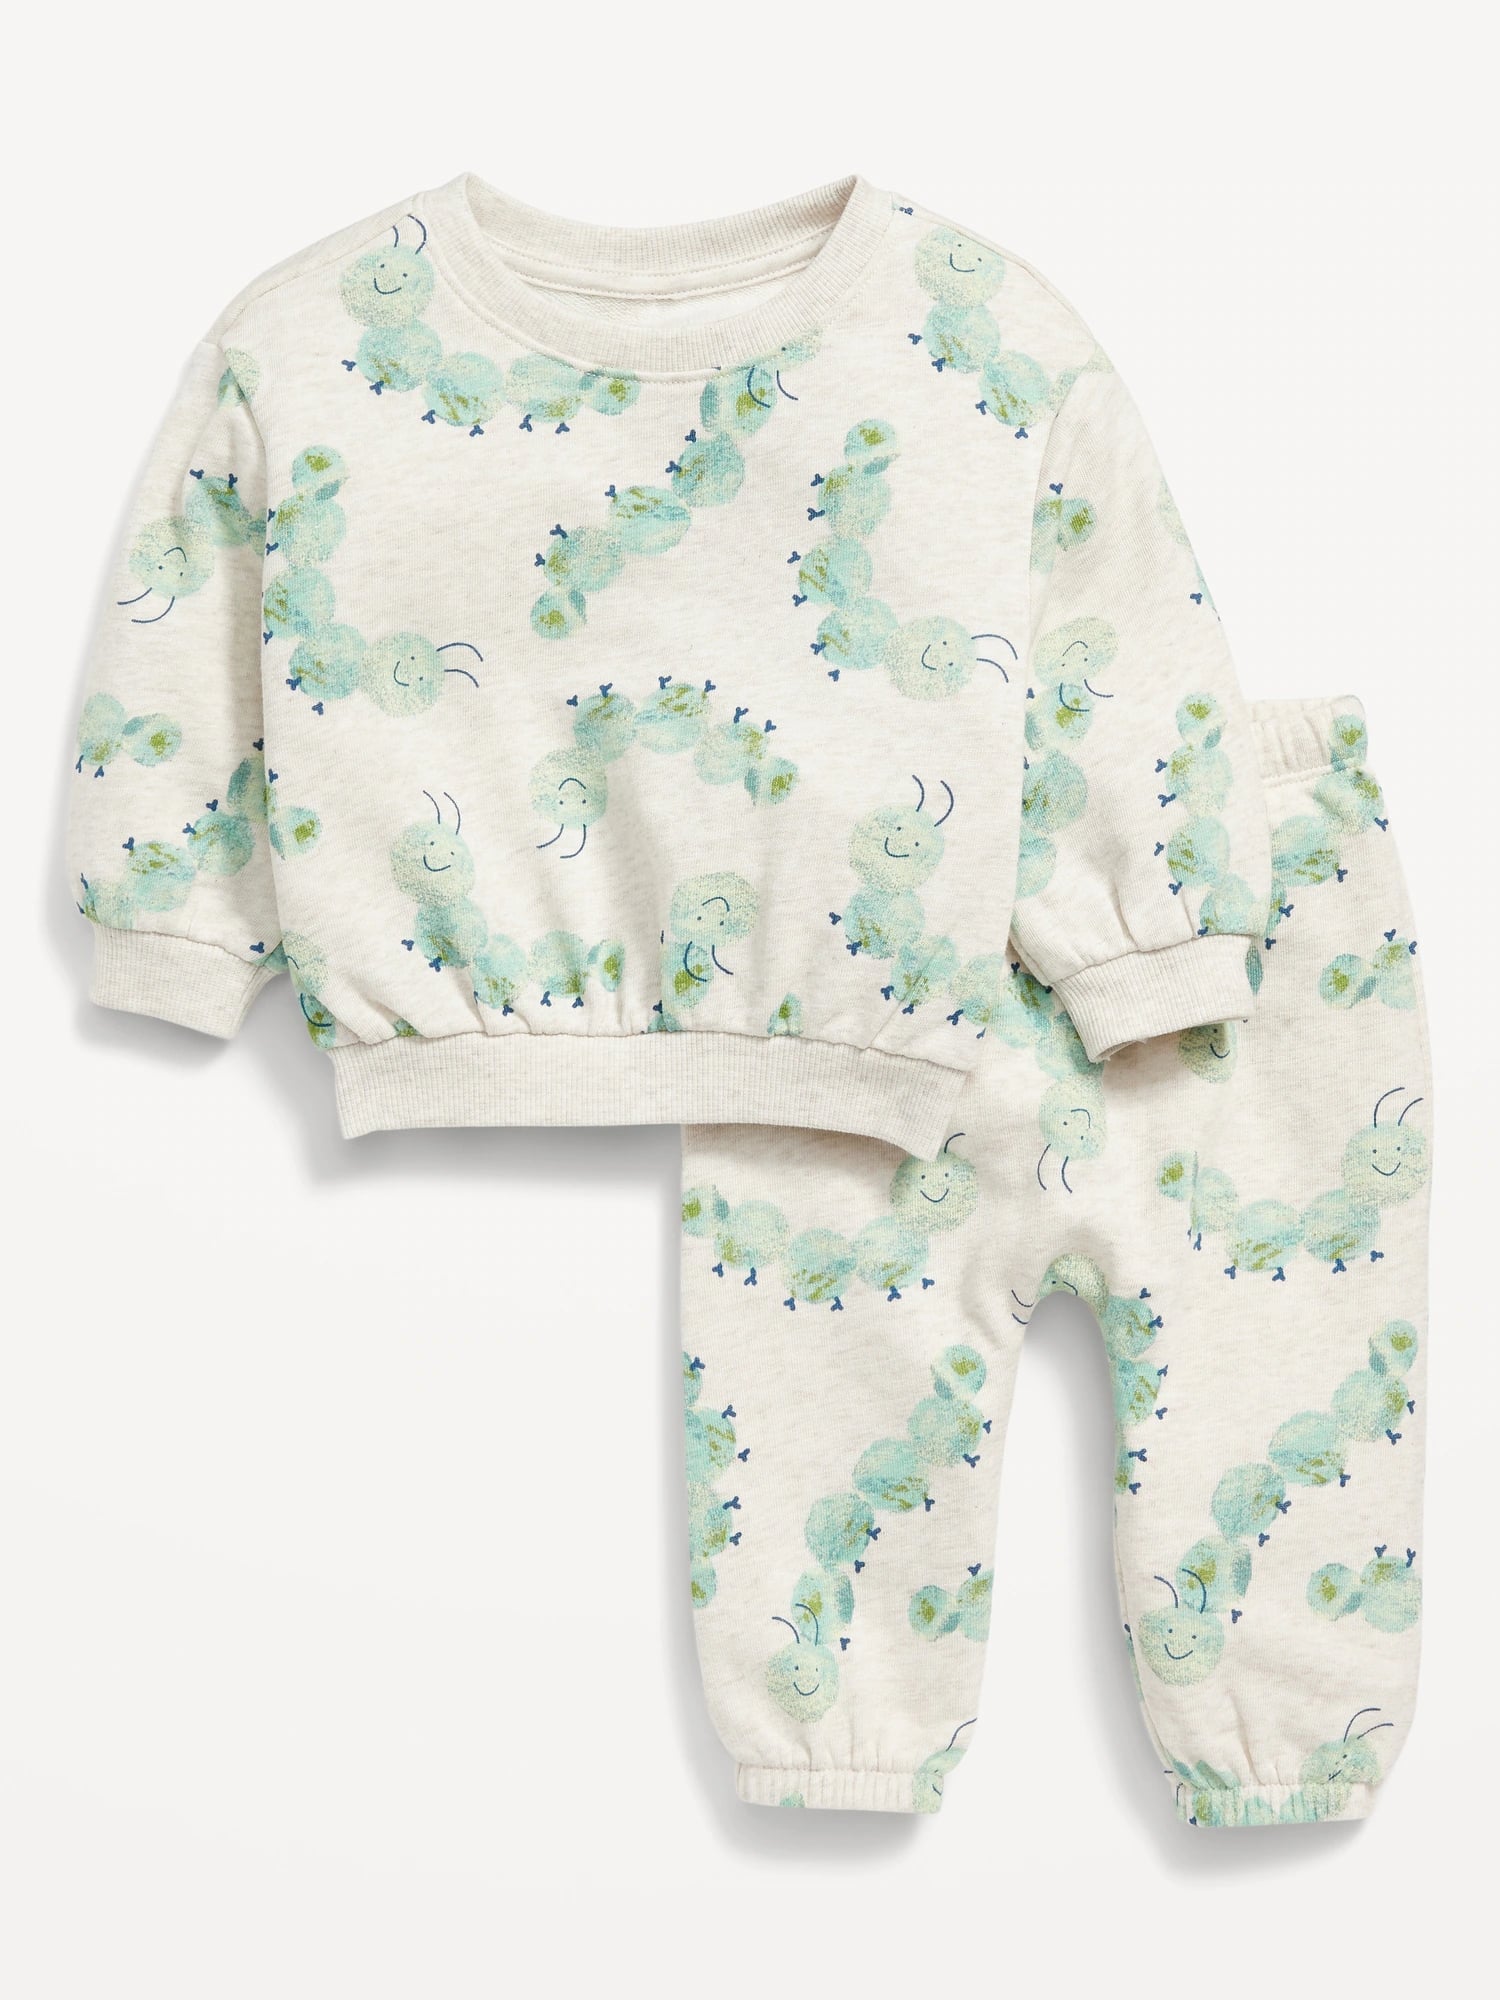 Do old navy baby clothes run small? - July 2019 Babies, Forums